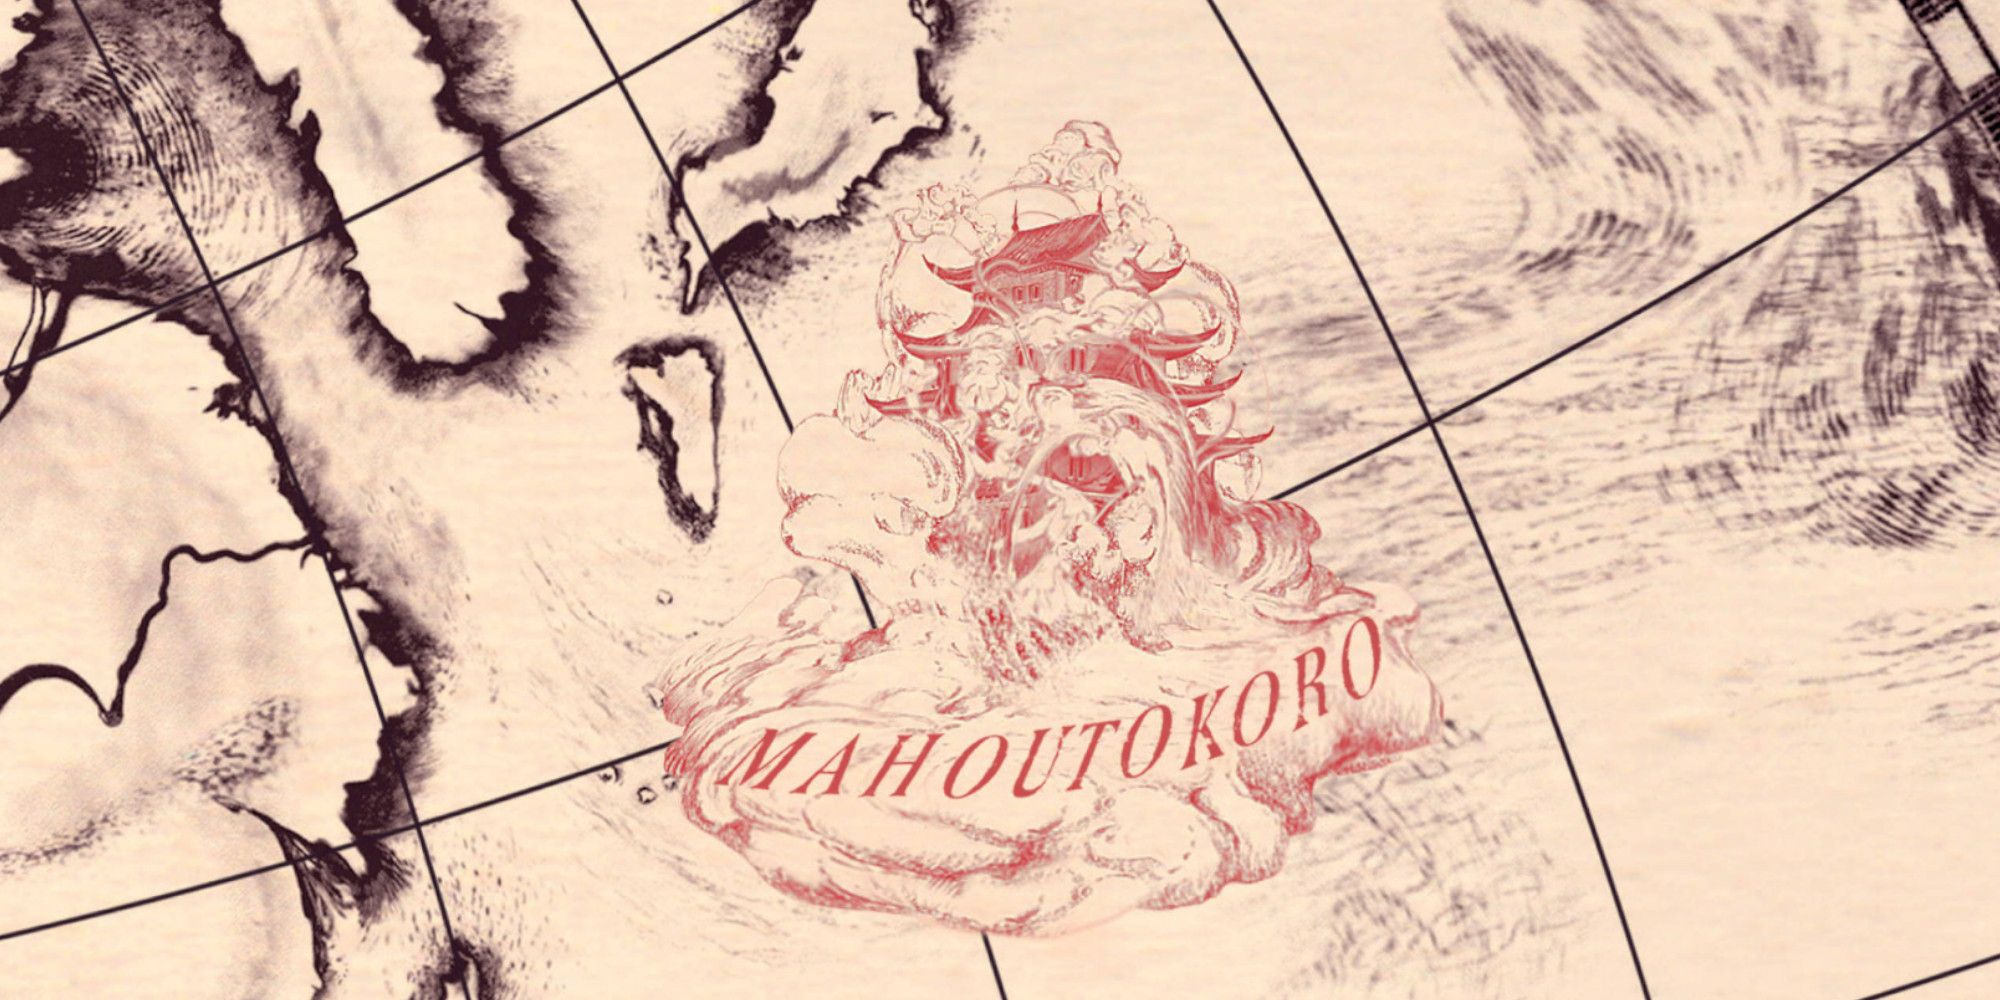 Harry Potter Biggest Developments (Introduced After The Books) The Japanese Wizarding School, Mahoutokoro